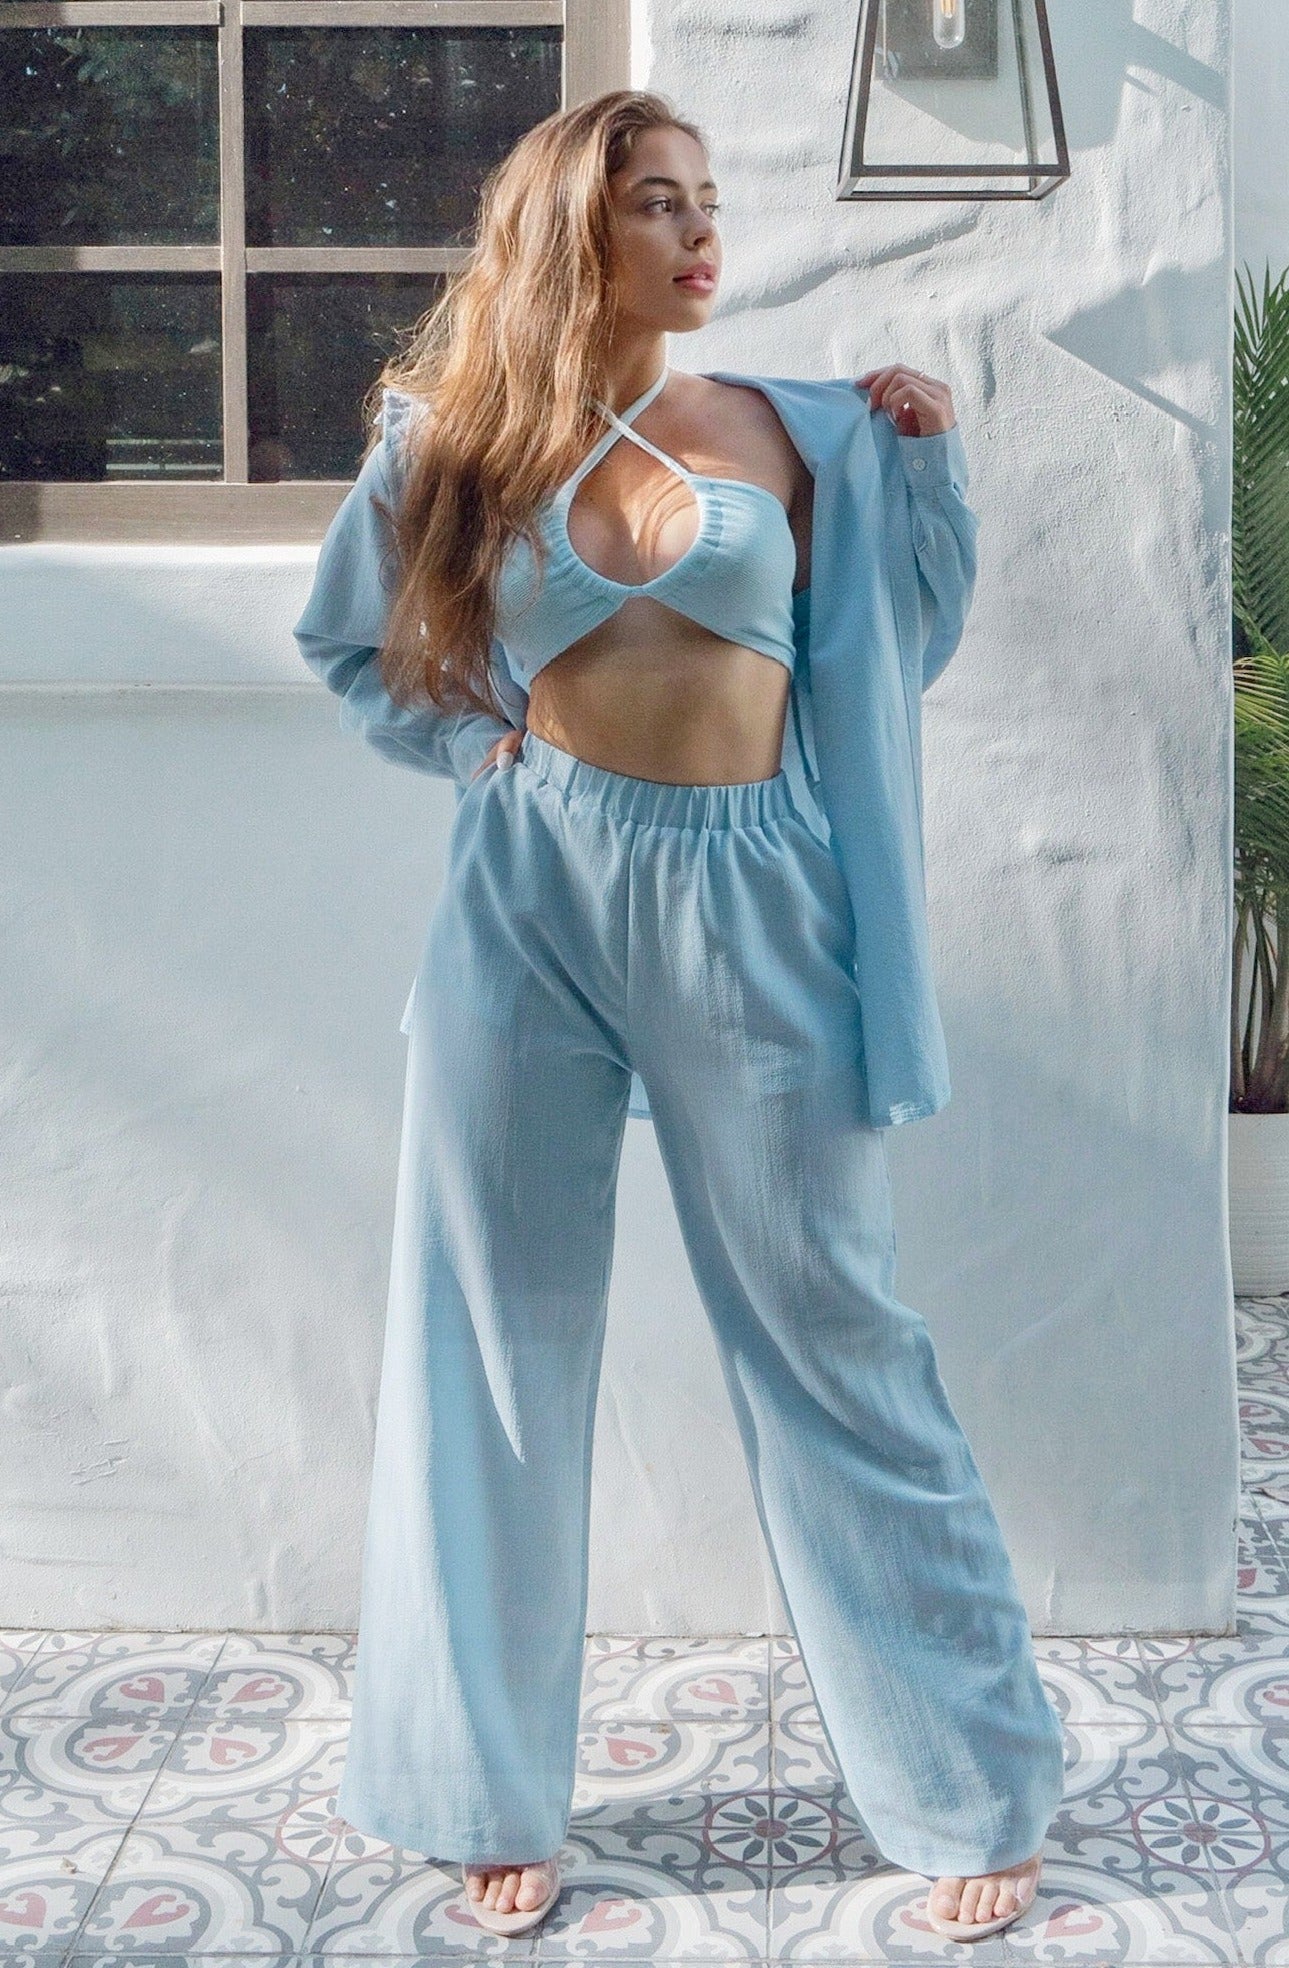 'Montauk' 3 Piece Button Down and Halter Pant Set in Dusty Blue. Scarlette The Label. An online fashion boutique for women.